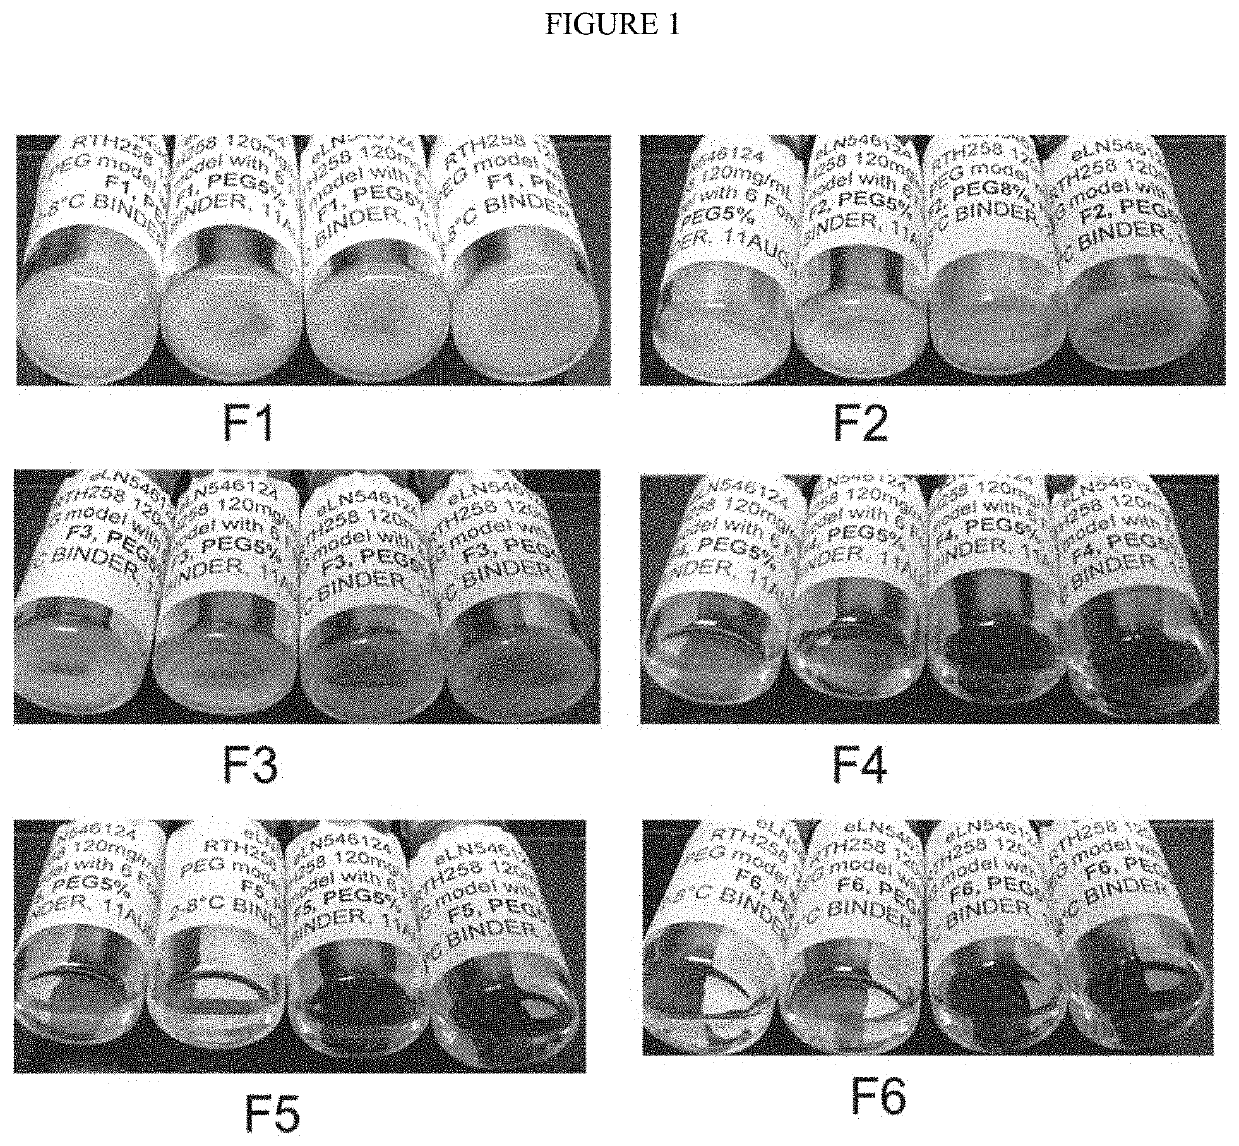 Protein solution formulation containing high concentration of an Anti-vegf antibody